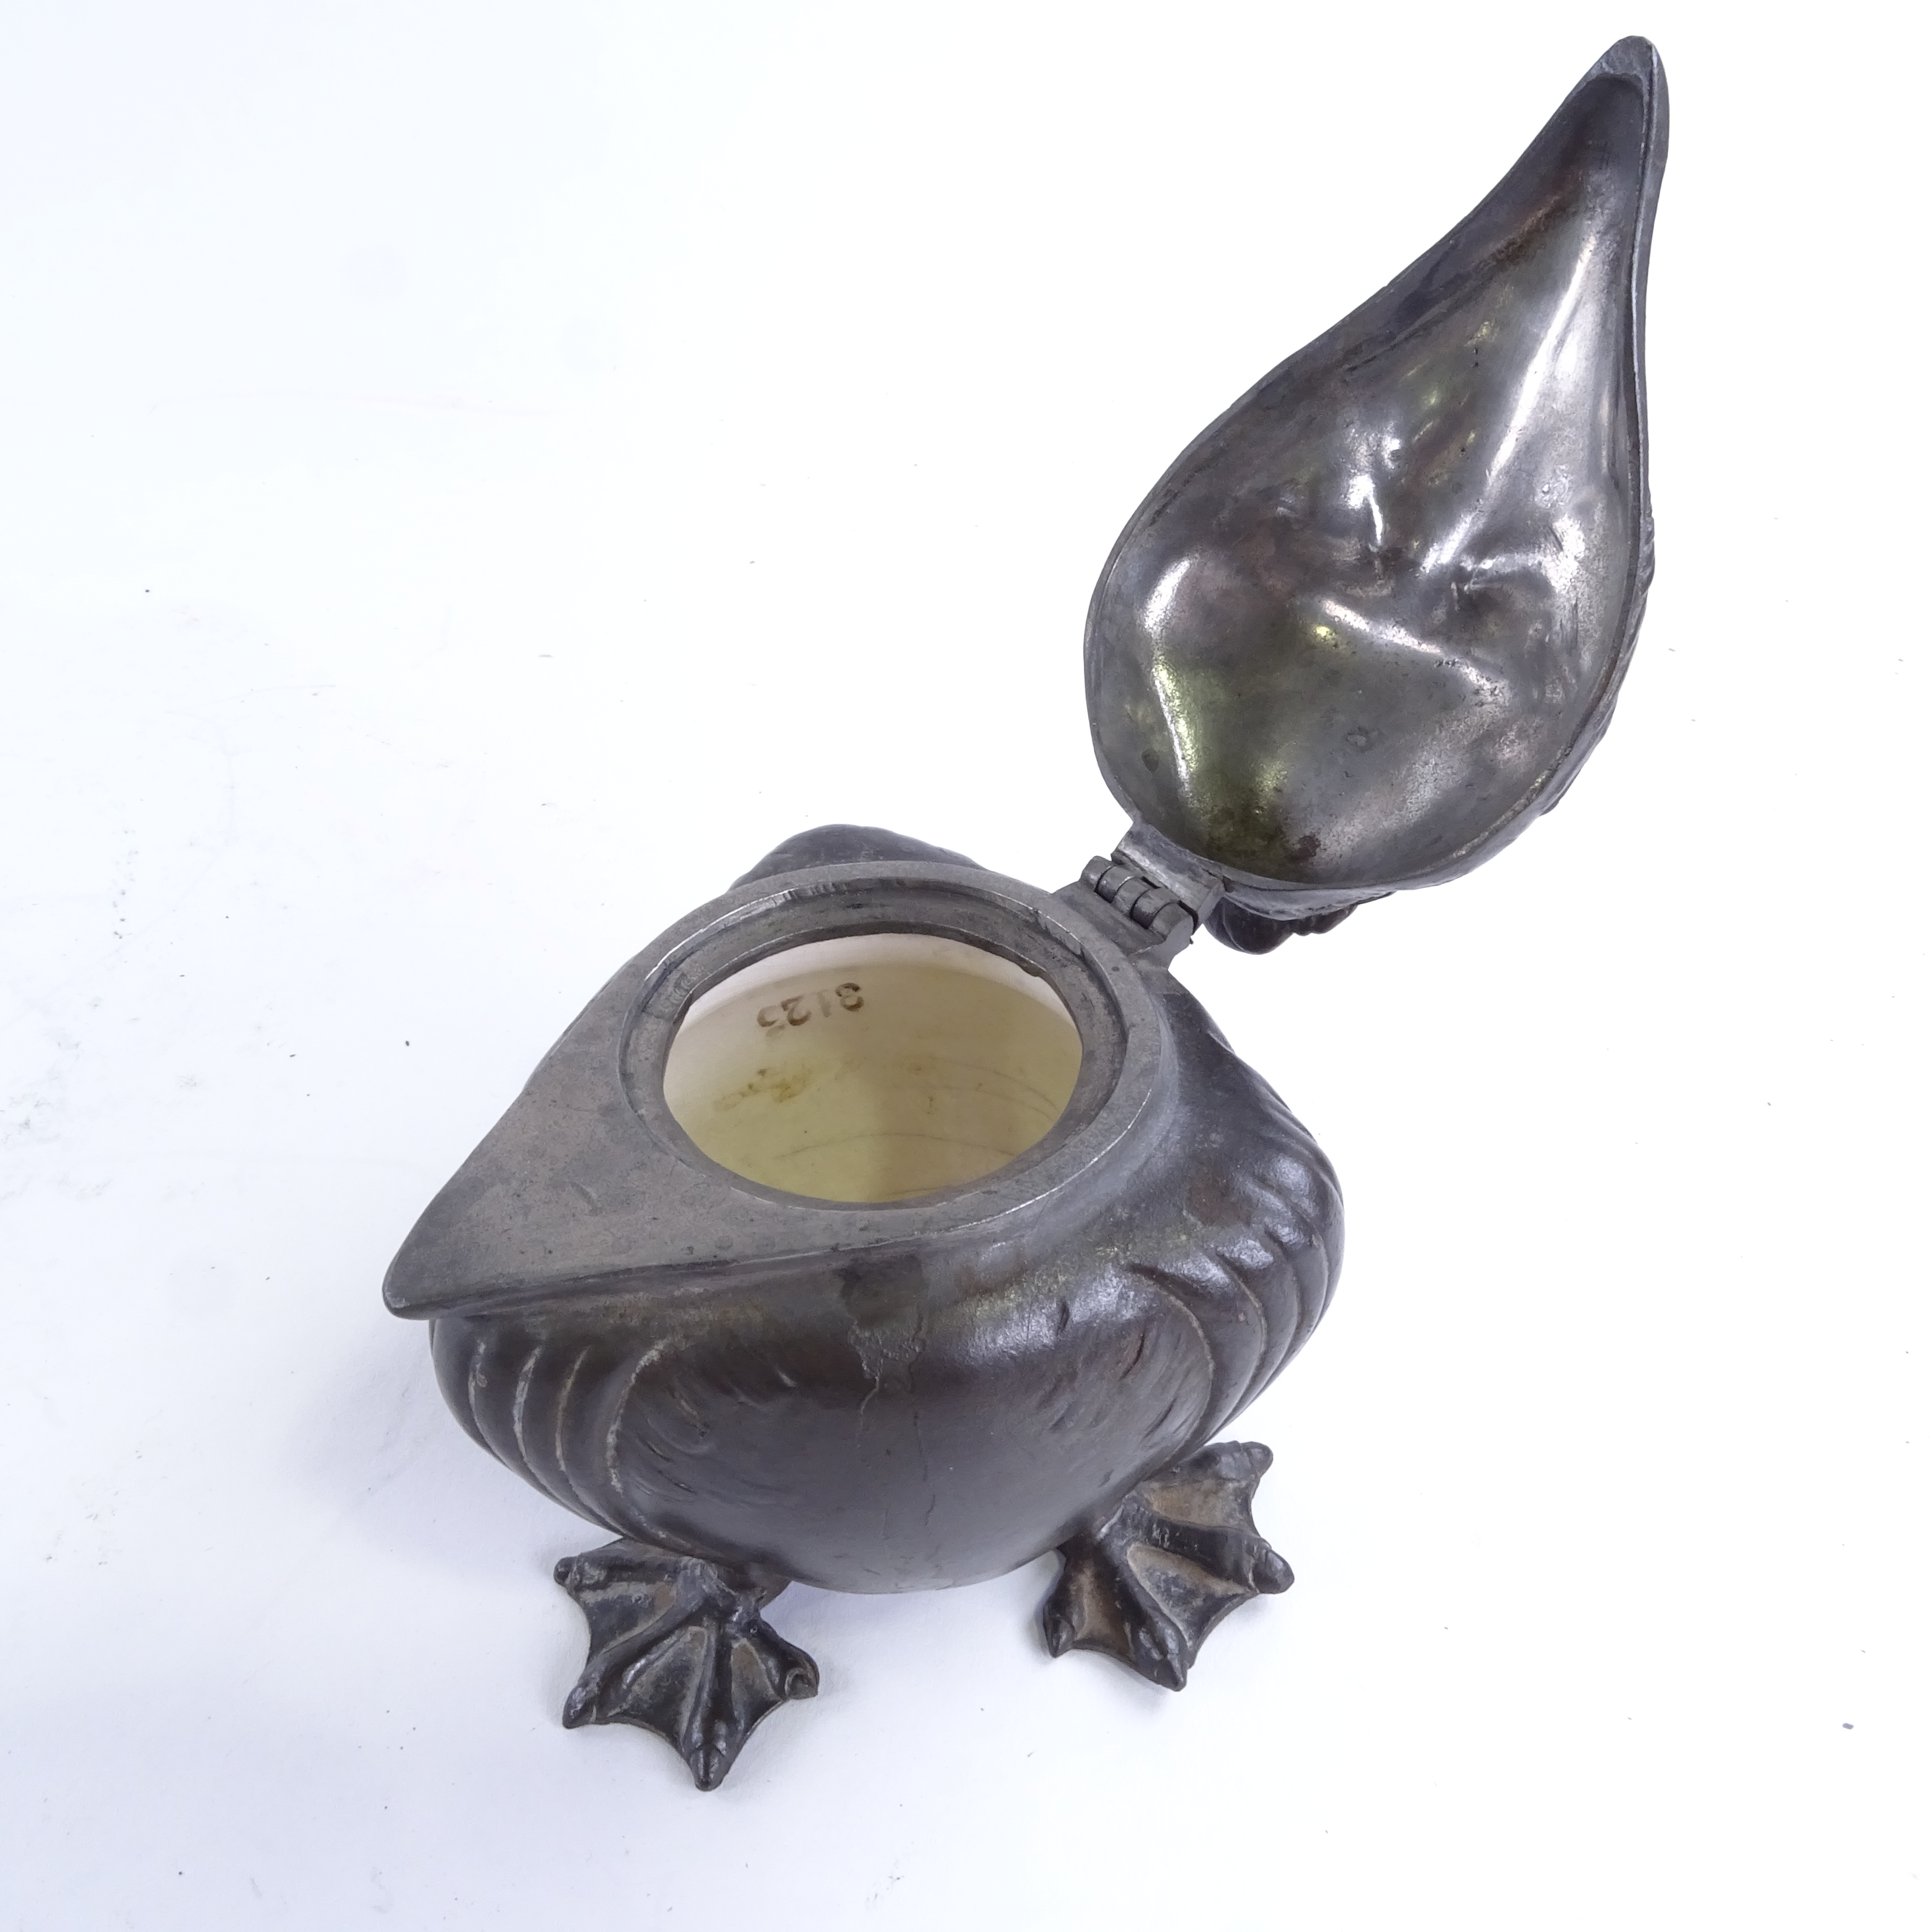 Attributed to Kayserzinn Jugendstil, a pewter inkwell, late 19th / early 20th century, grotesque - Image 2 of 3